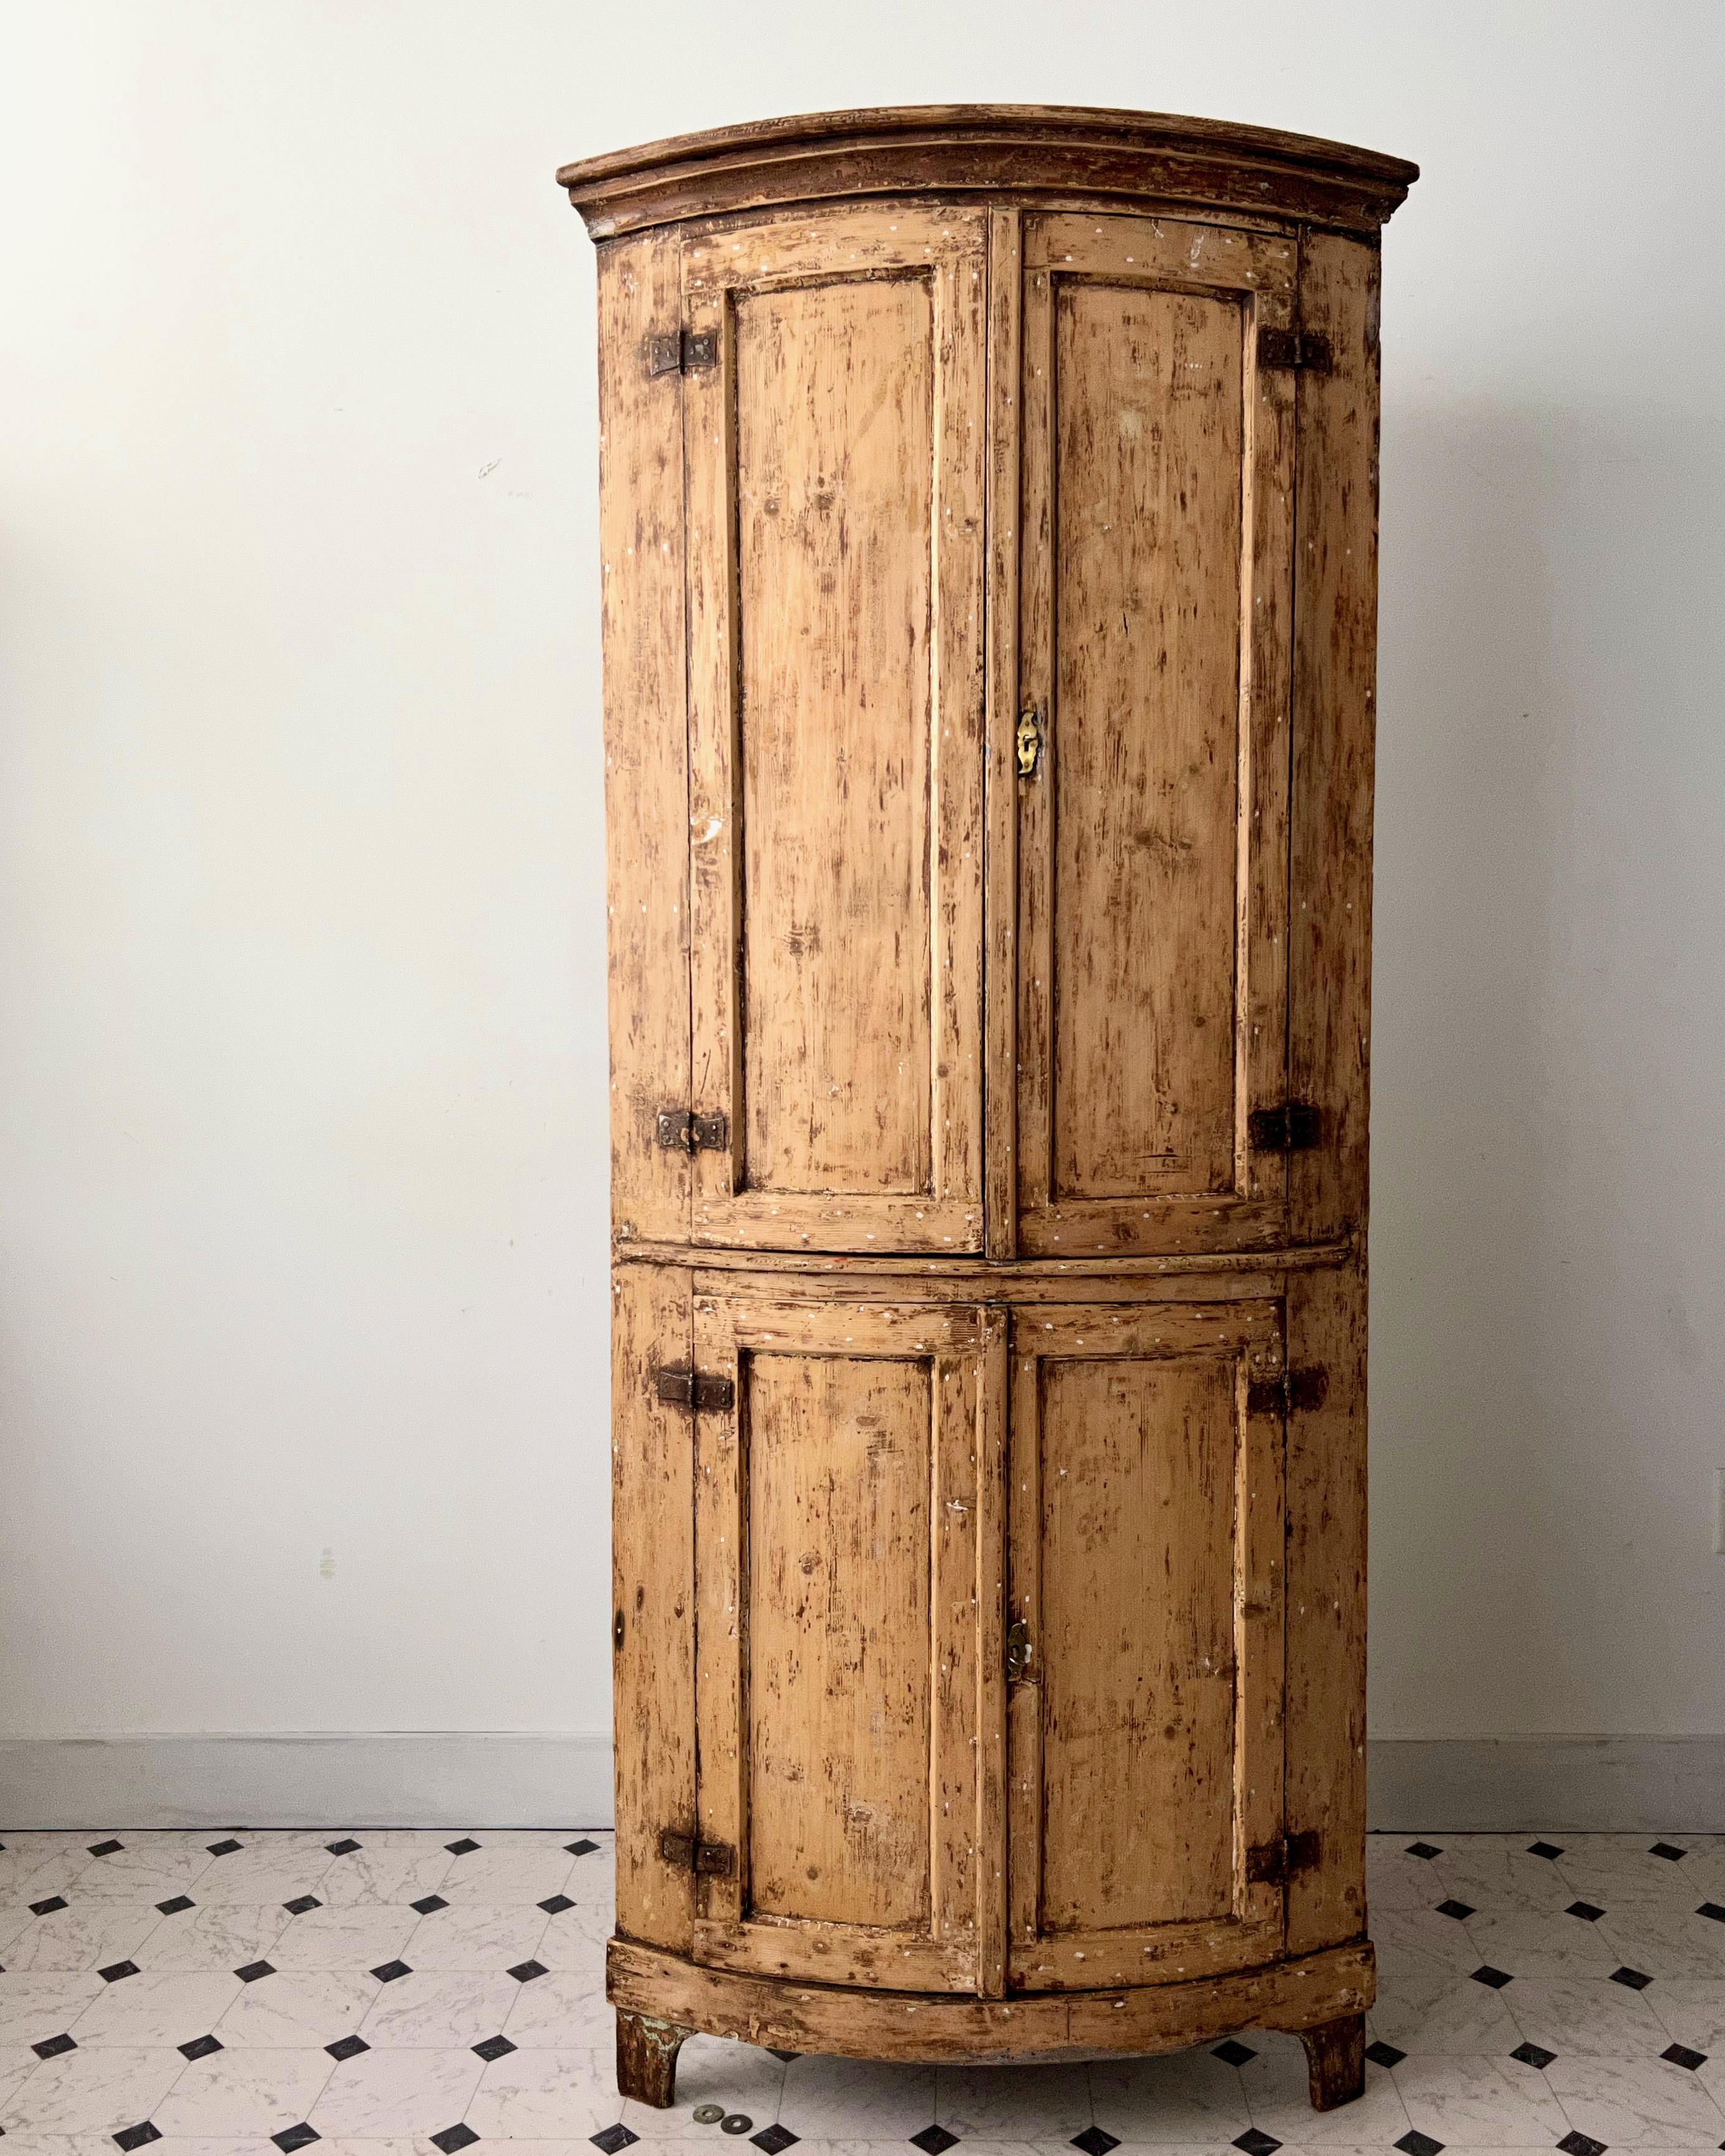 19th century Swedish Gustavian period bow front corner cabinet in one piece and with most of its original paint.
Sweden circa 1860.